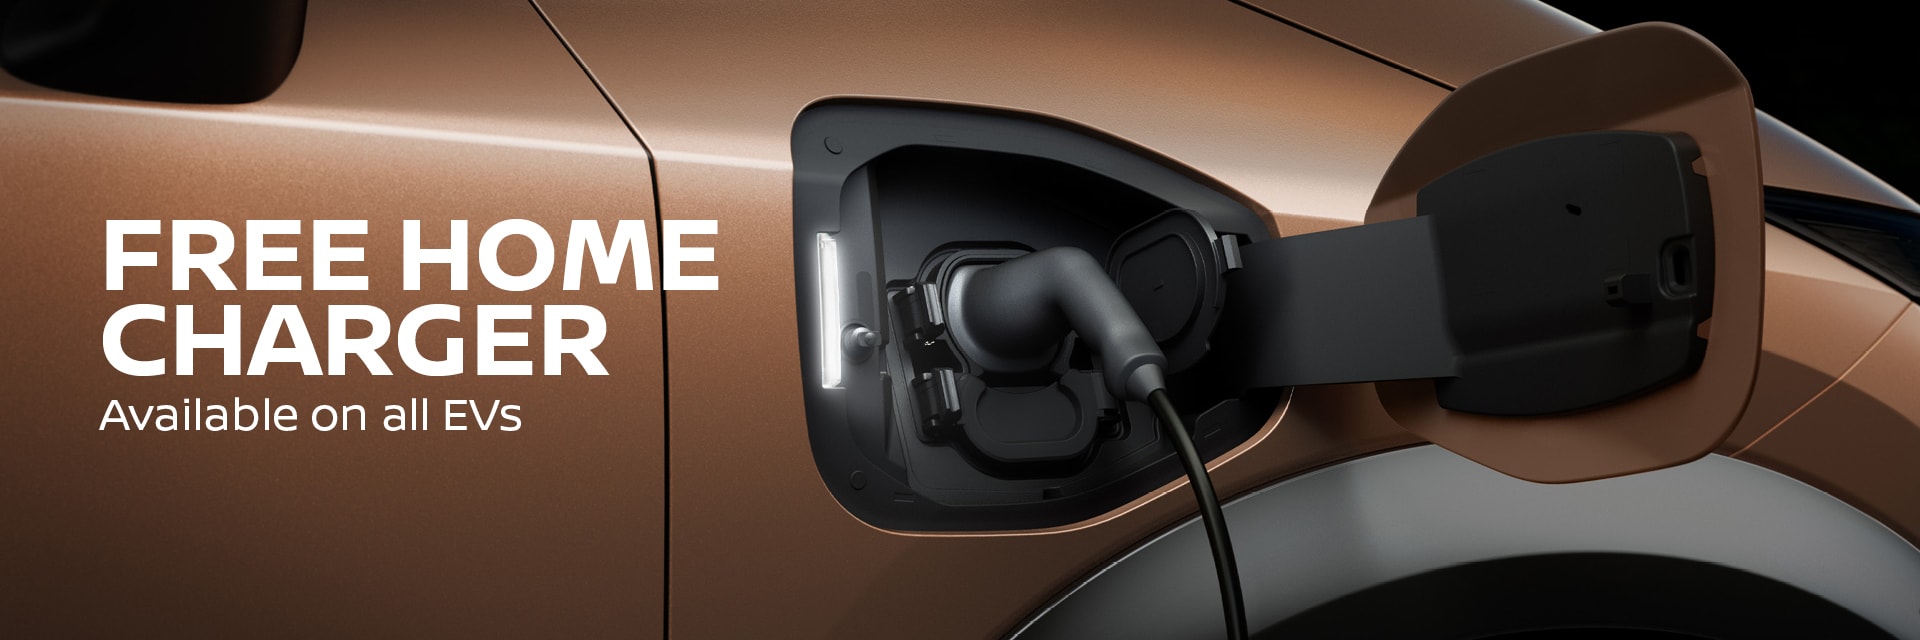 Free Home Charger - Nissan